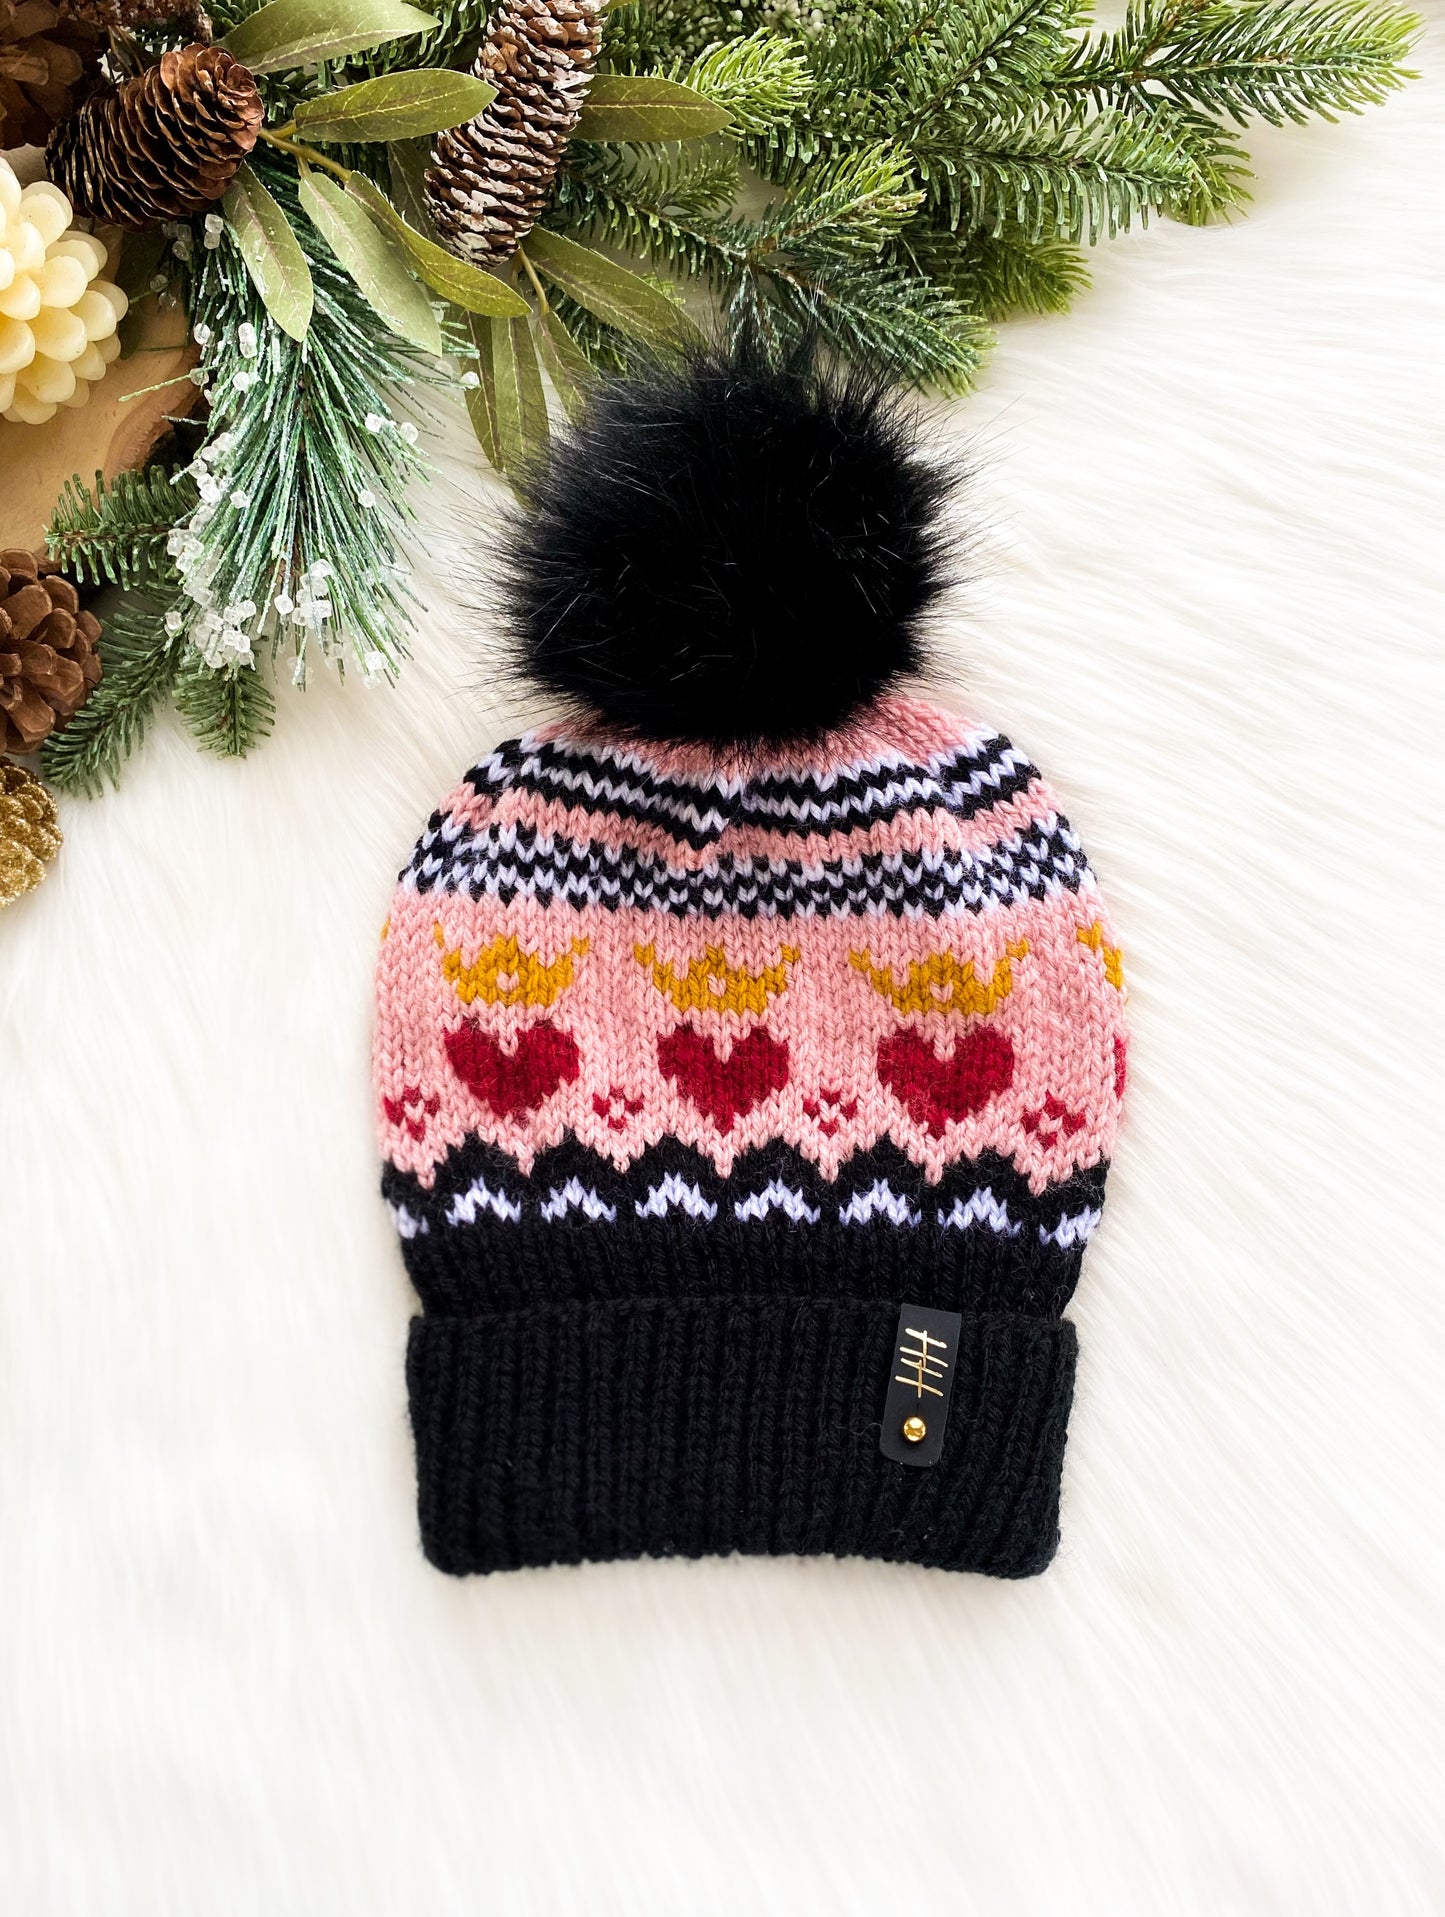 “Queen of Hearts” knitted fair isle hat with black pom